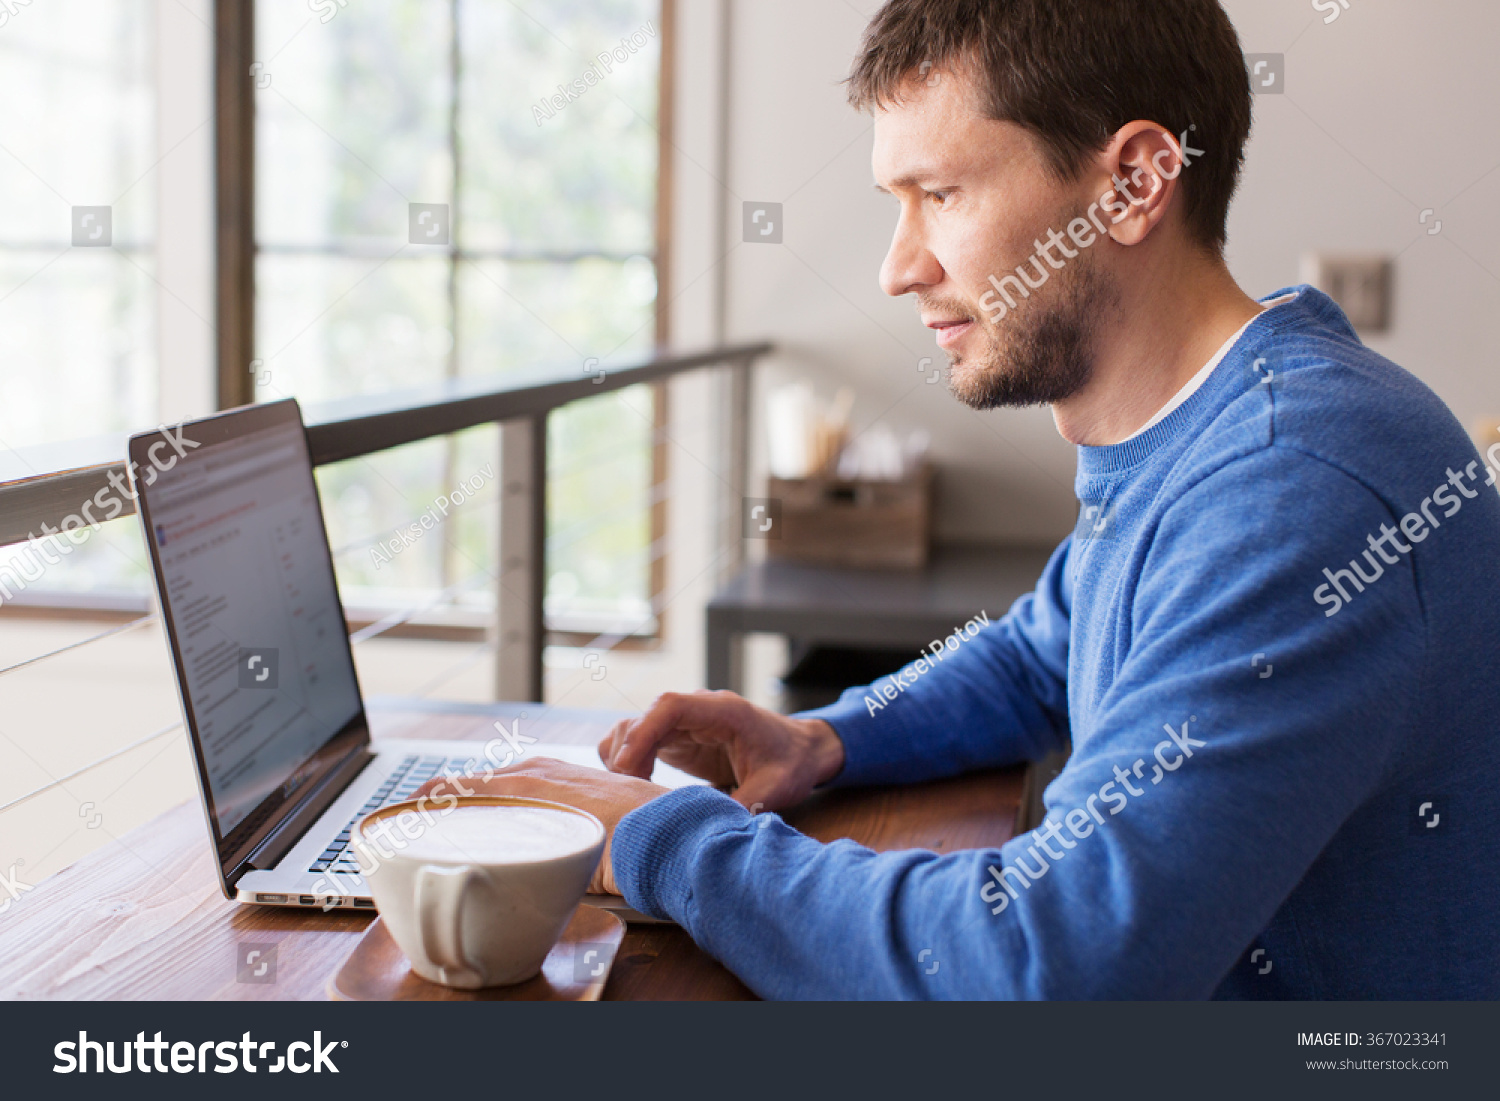 positive man working on laptop computer in cafe drinking coffee, lifestyle concept #367023341